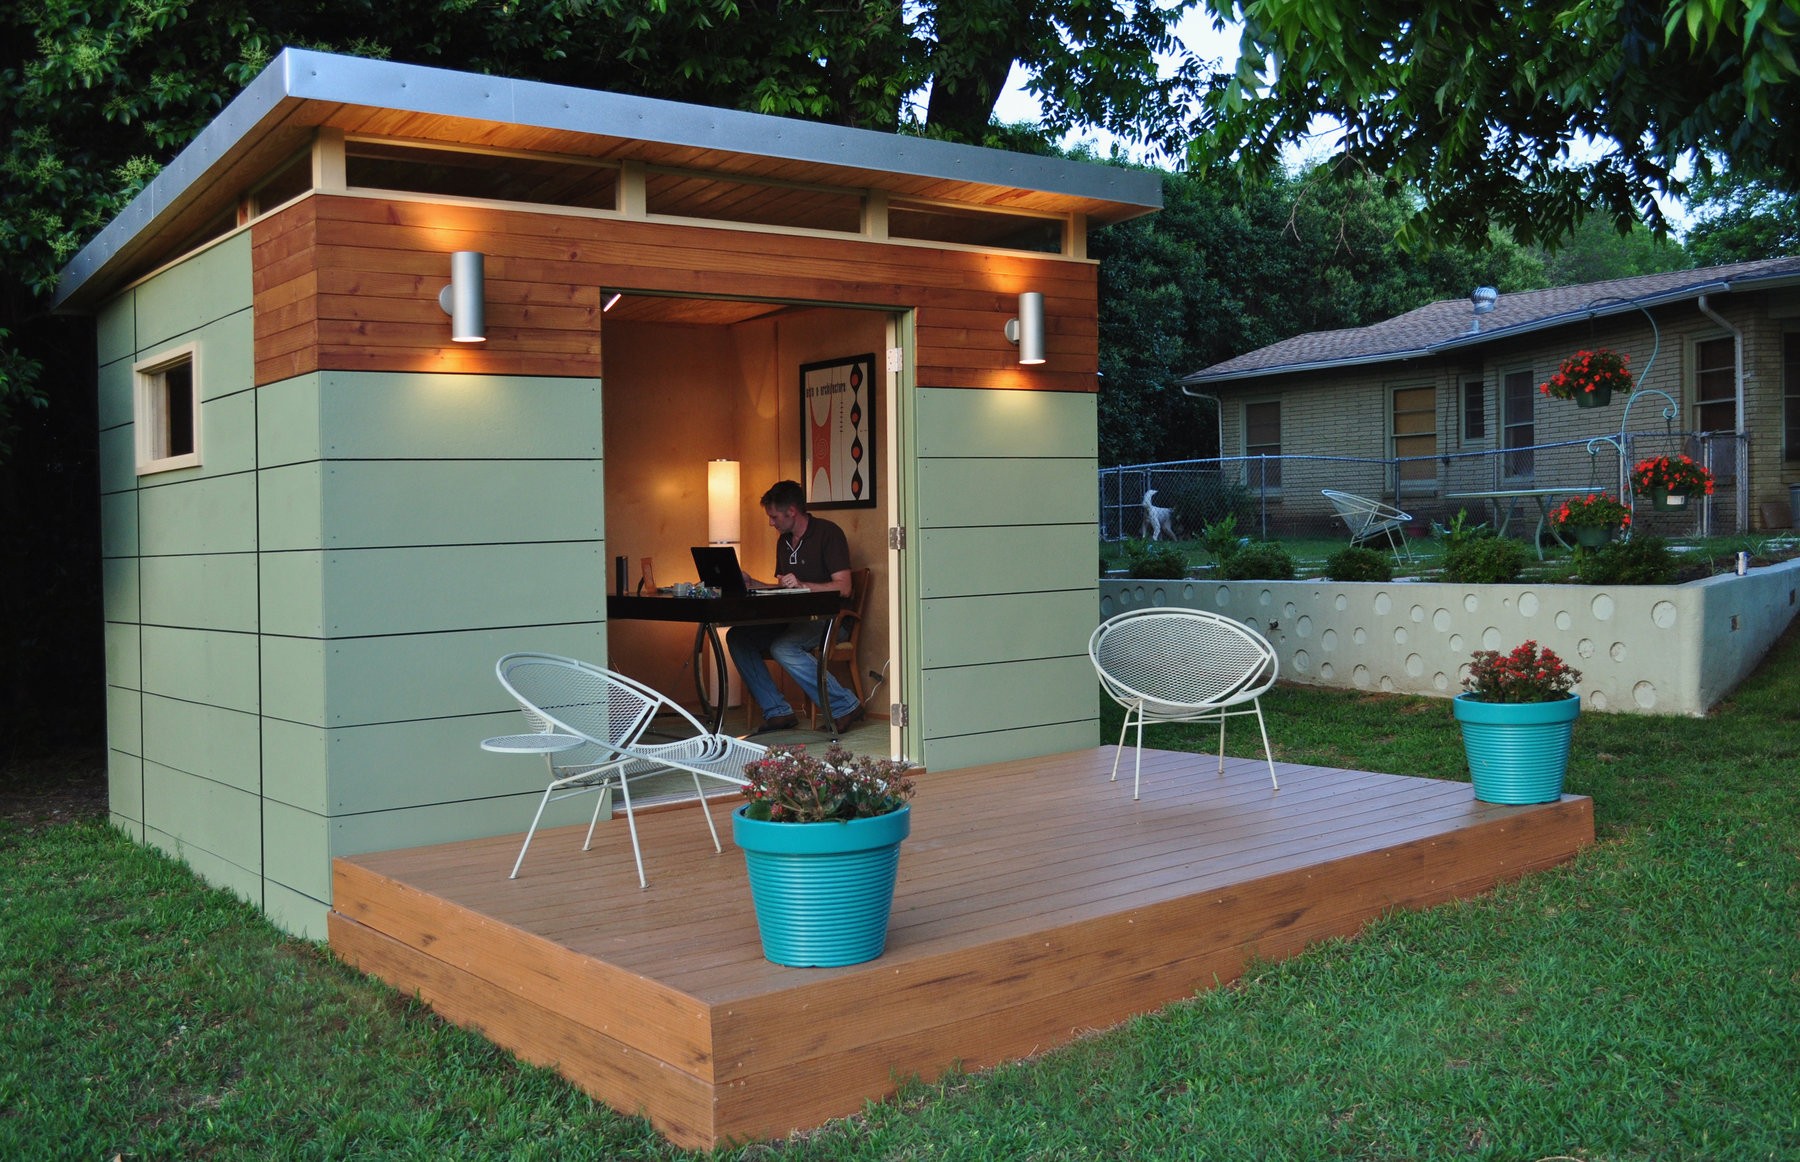 outdoor playhouse with floor